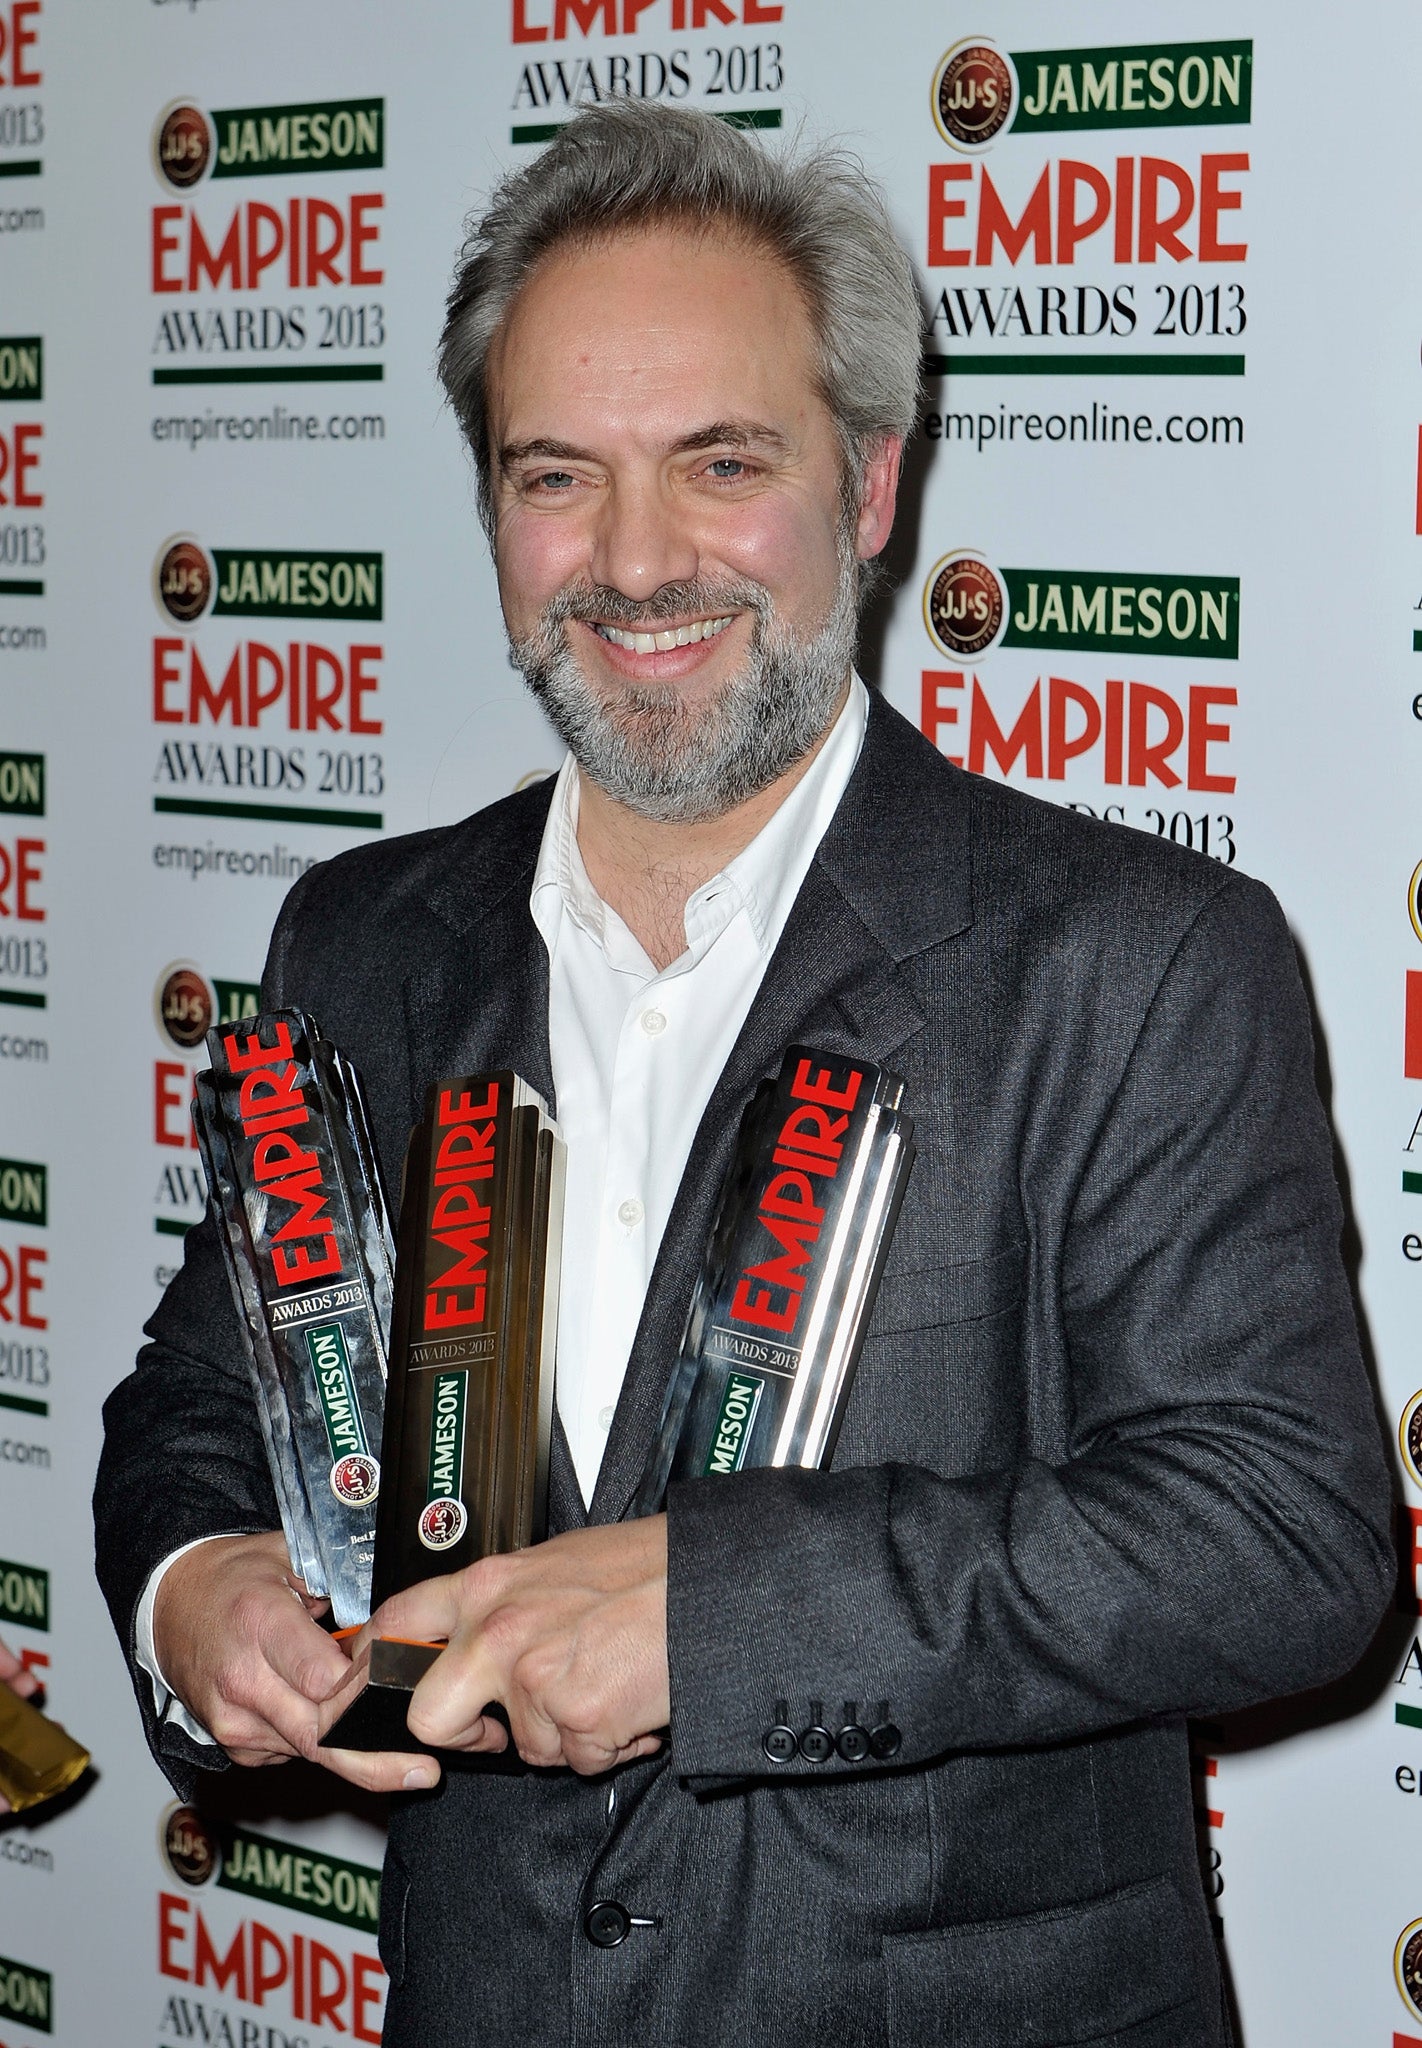 Sam Mendes scooped three Empire awards for Skyfall